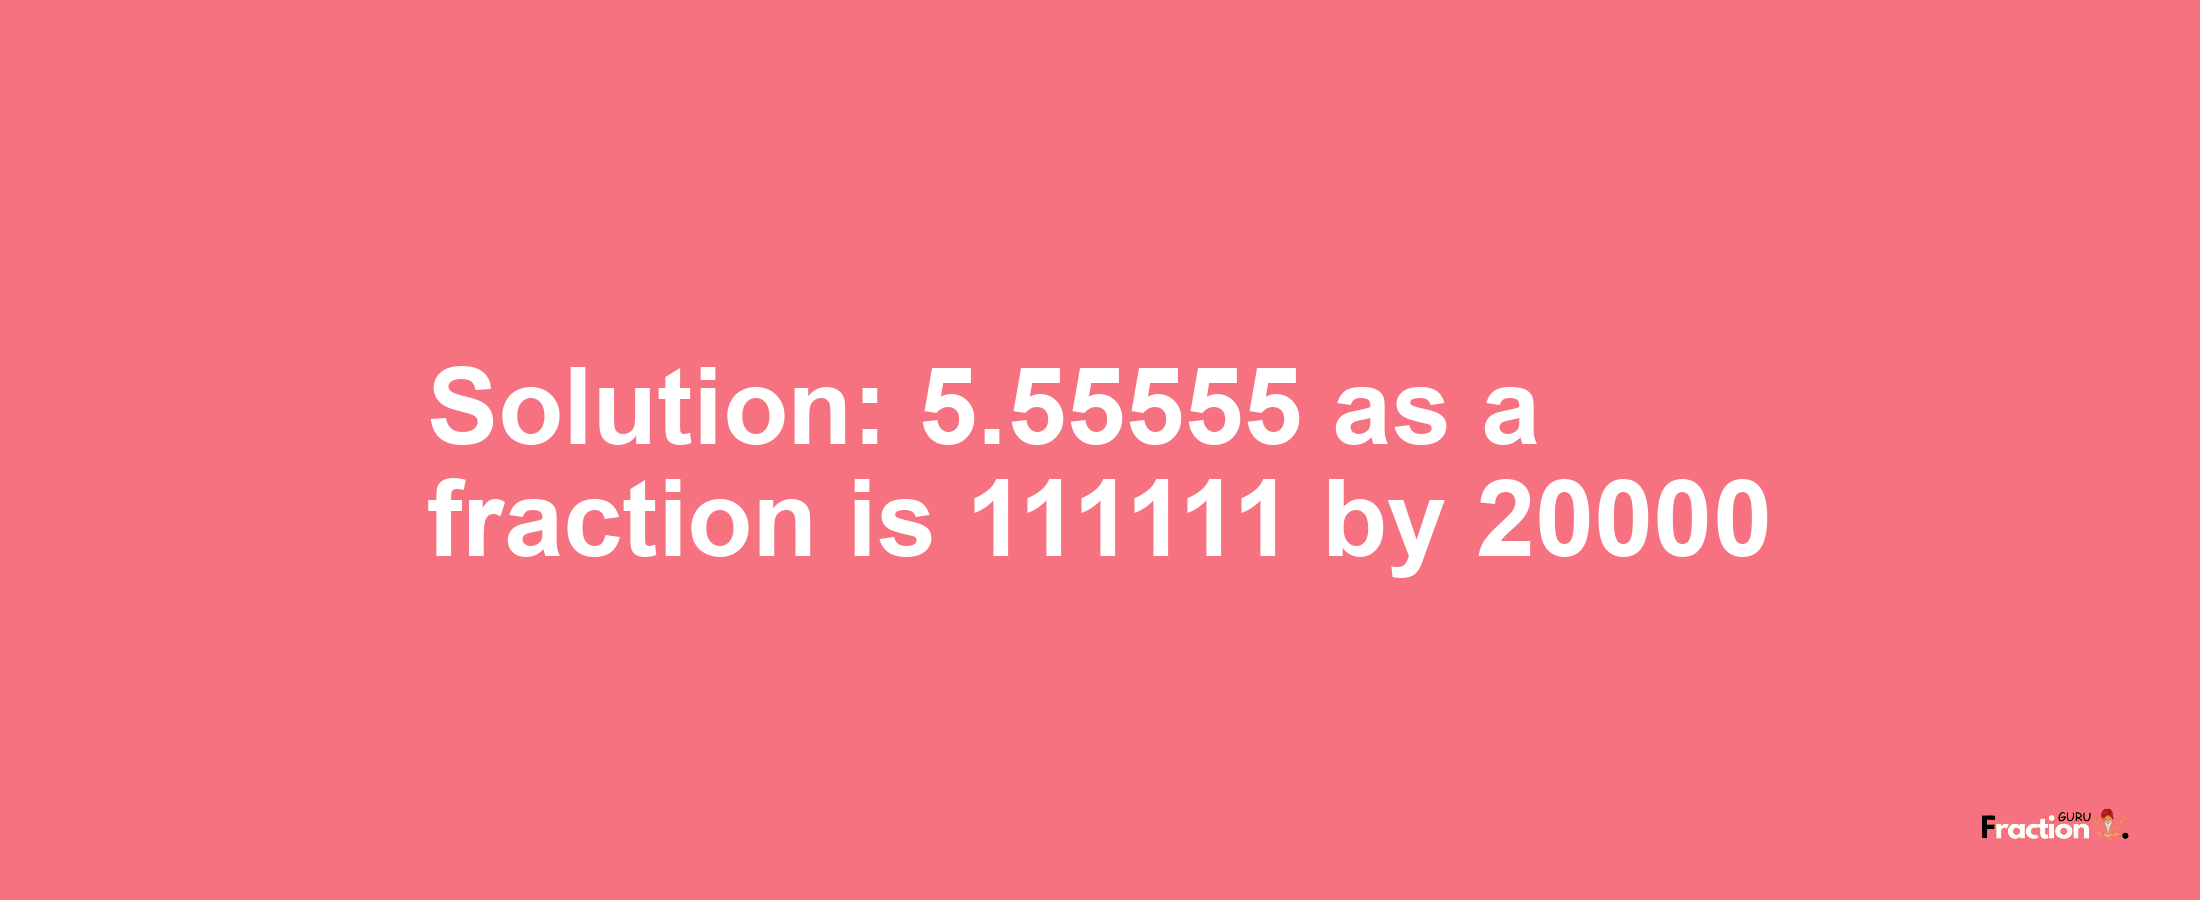 Solution:5.55555 as a fraction is 111111/20000